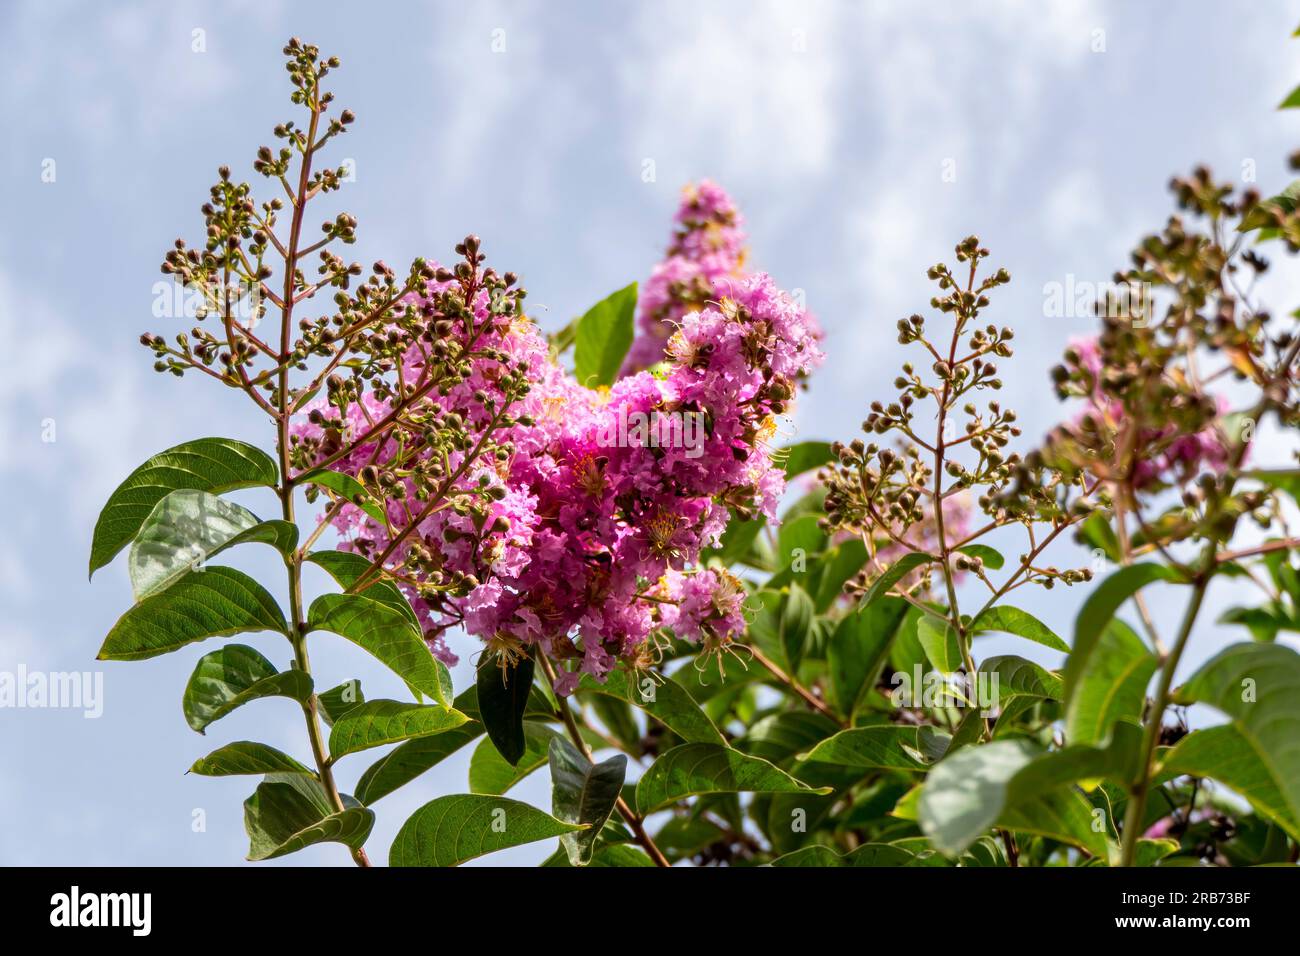 Brushes of pink flowers Crape Myrtle or Lagerstroemia close up on a blurred background Stock Photo